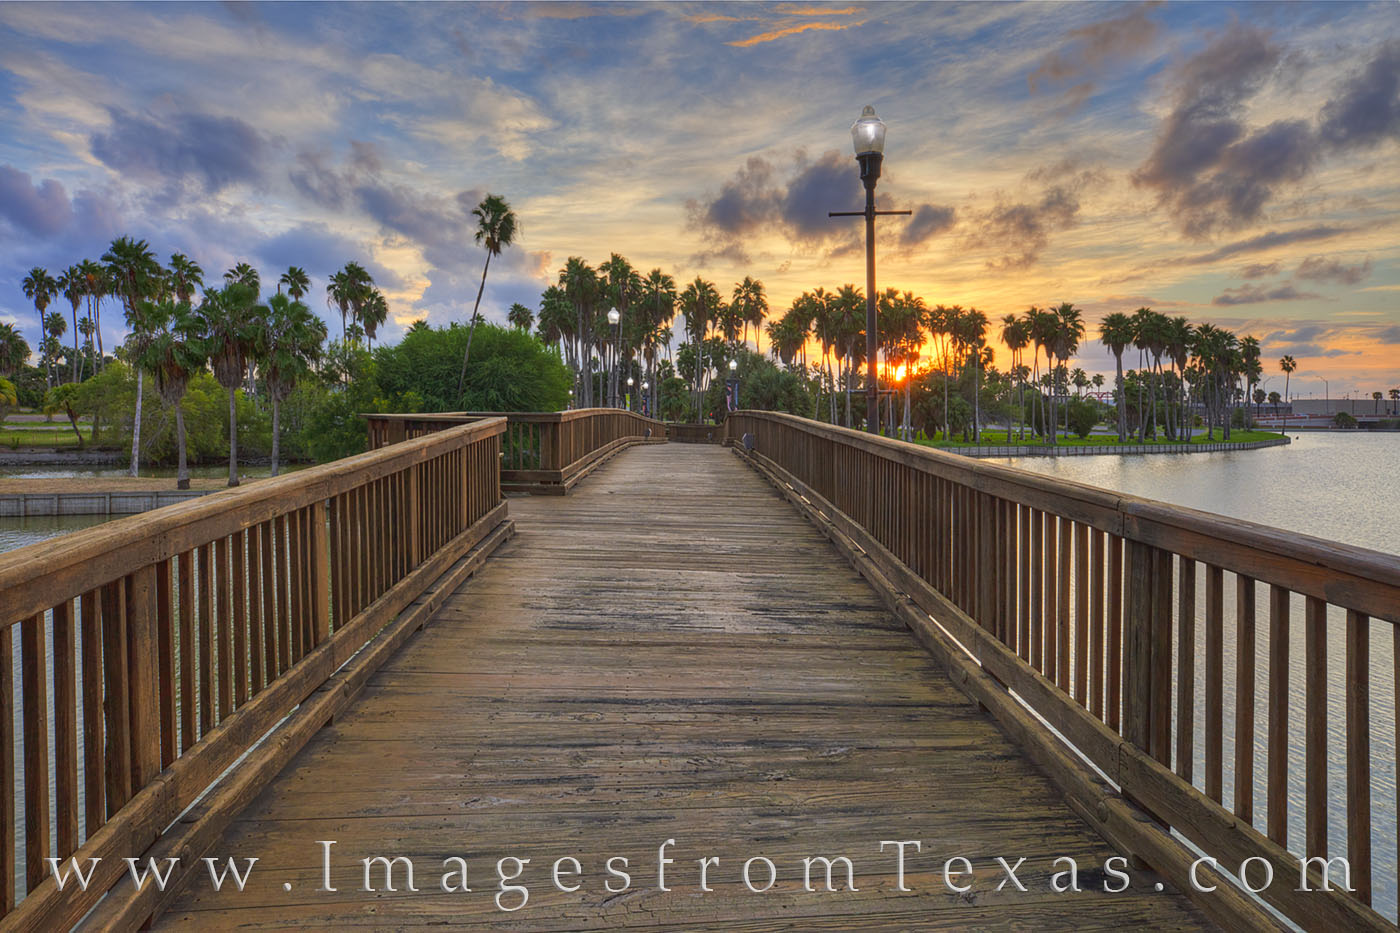 Along one of Brownsville’s many resacas, a footbridge crosses over the water. Palm trees line both sides of the waterway, and...